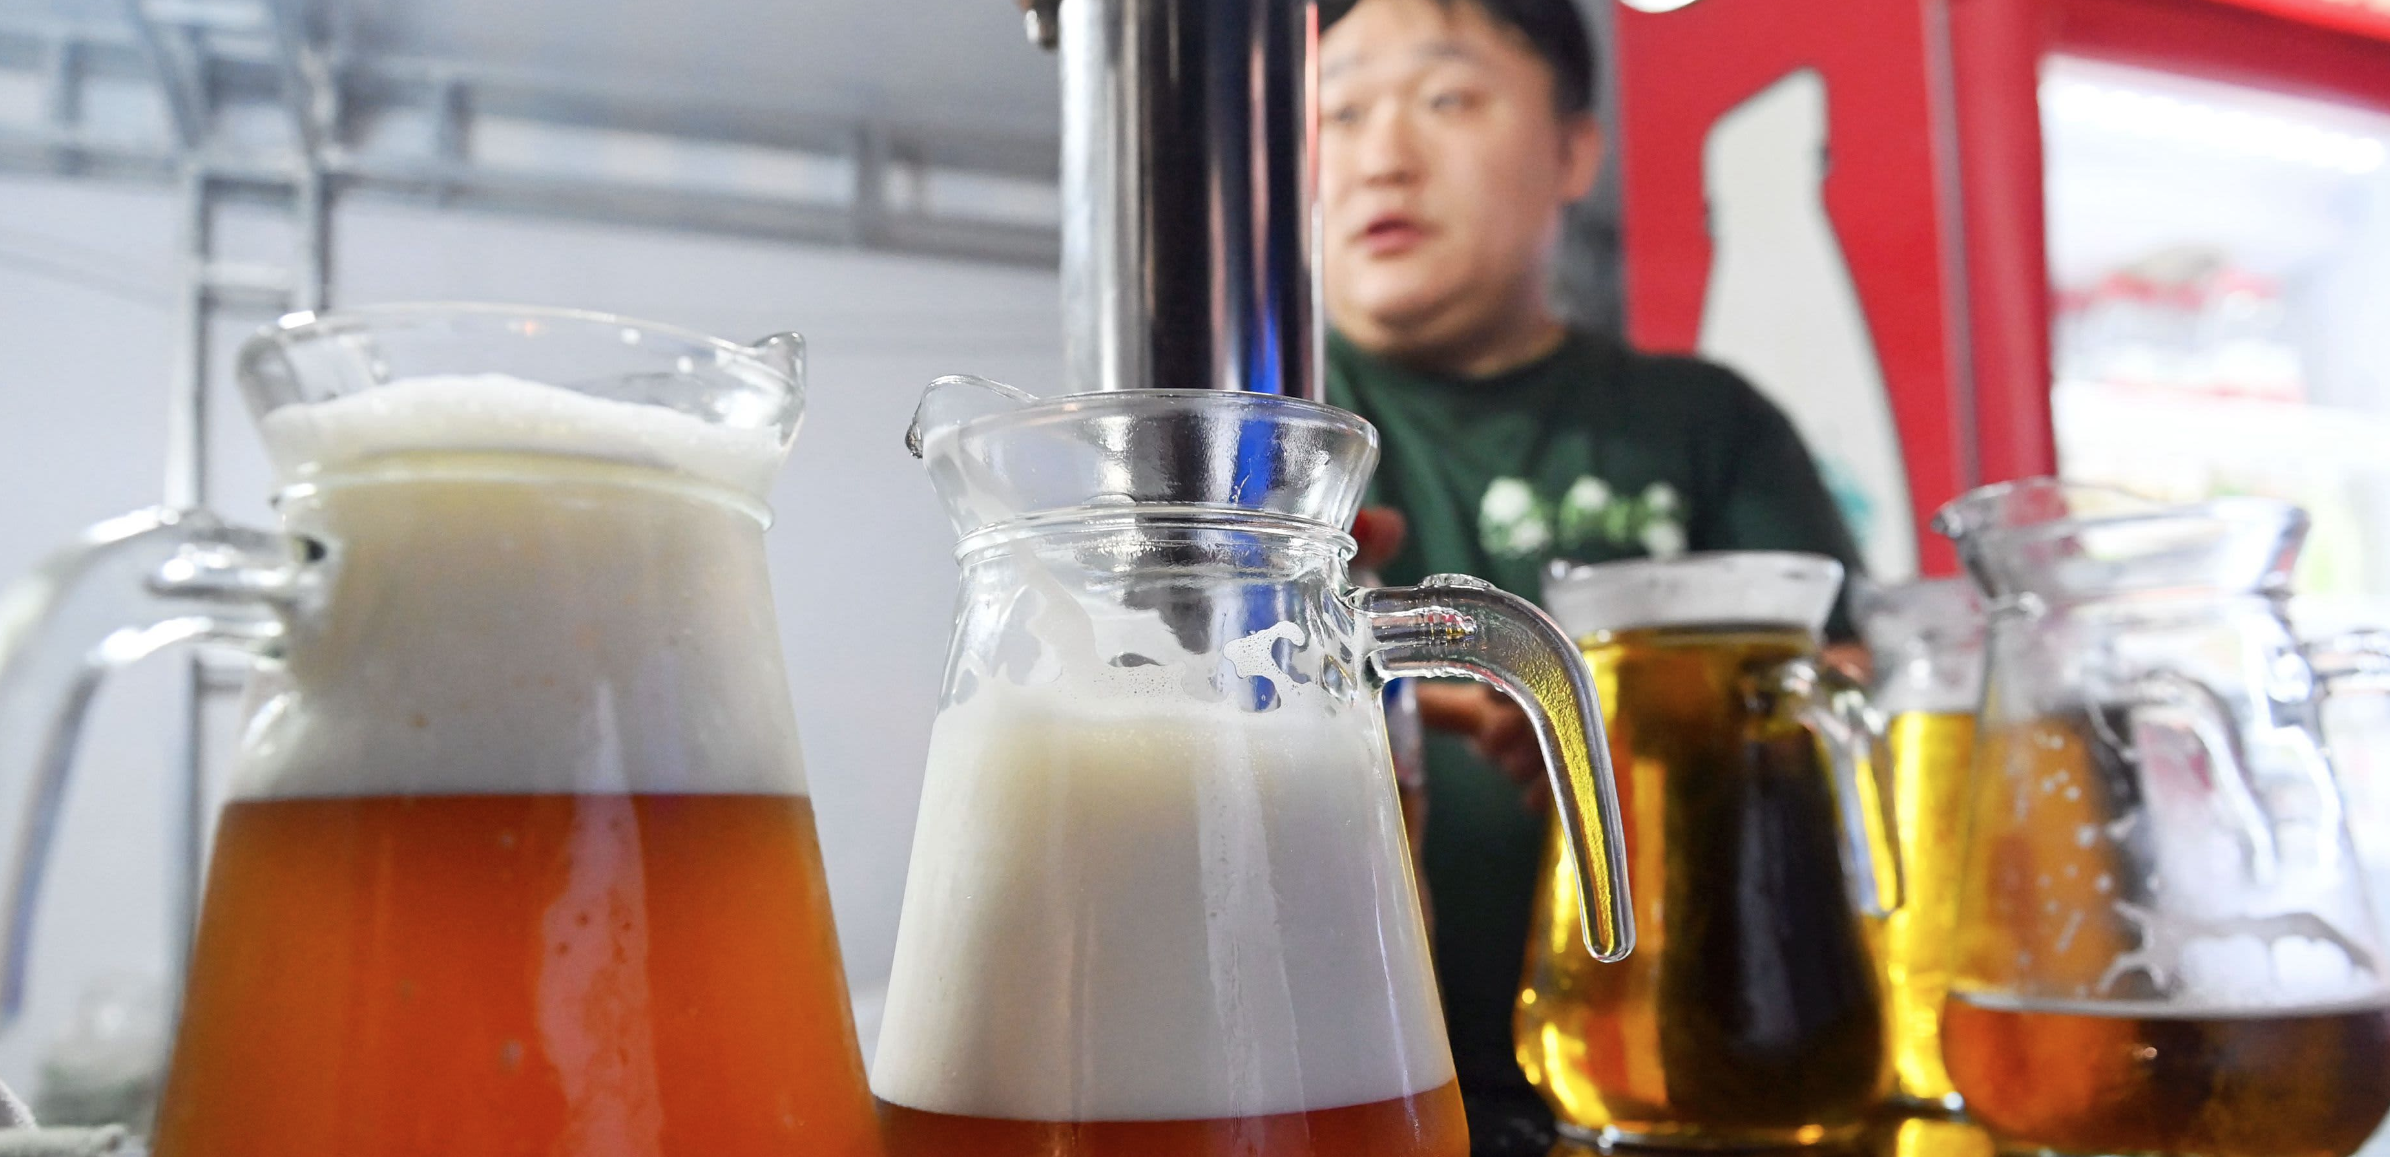 Global beer market leader China is expected to grow as consumers become more affluent